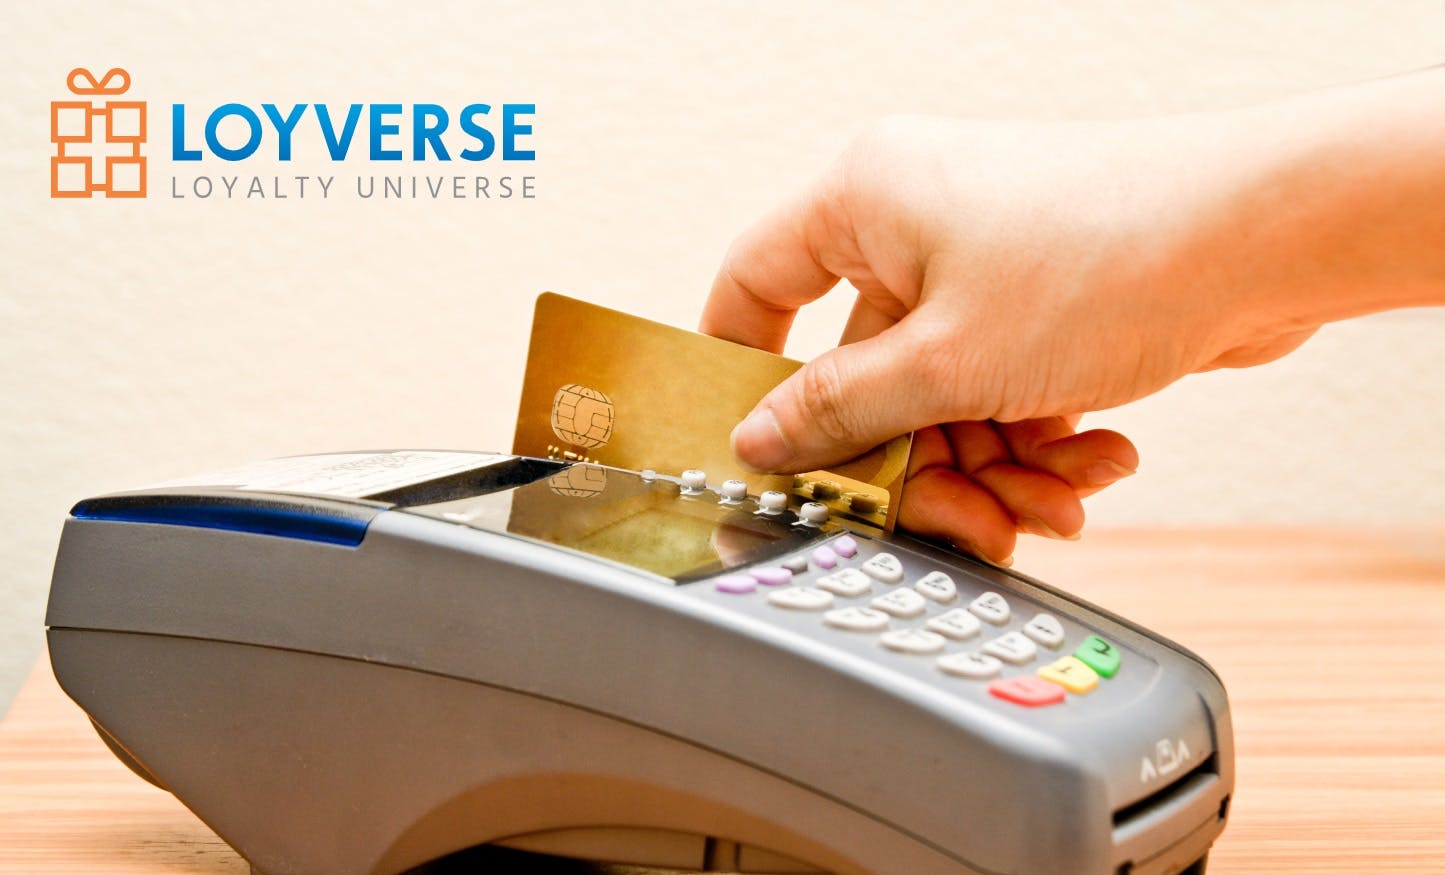 Loyverse POS: Review, Features, and Prices